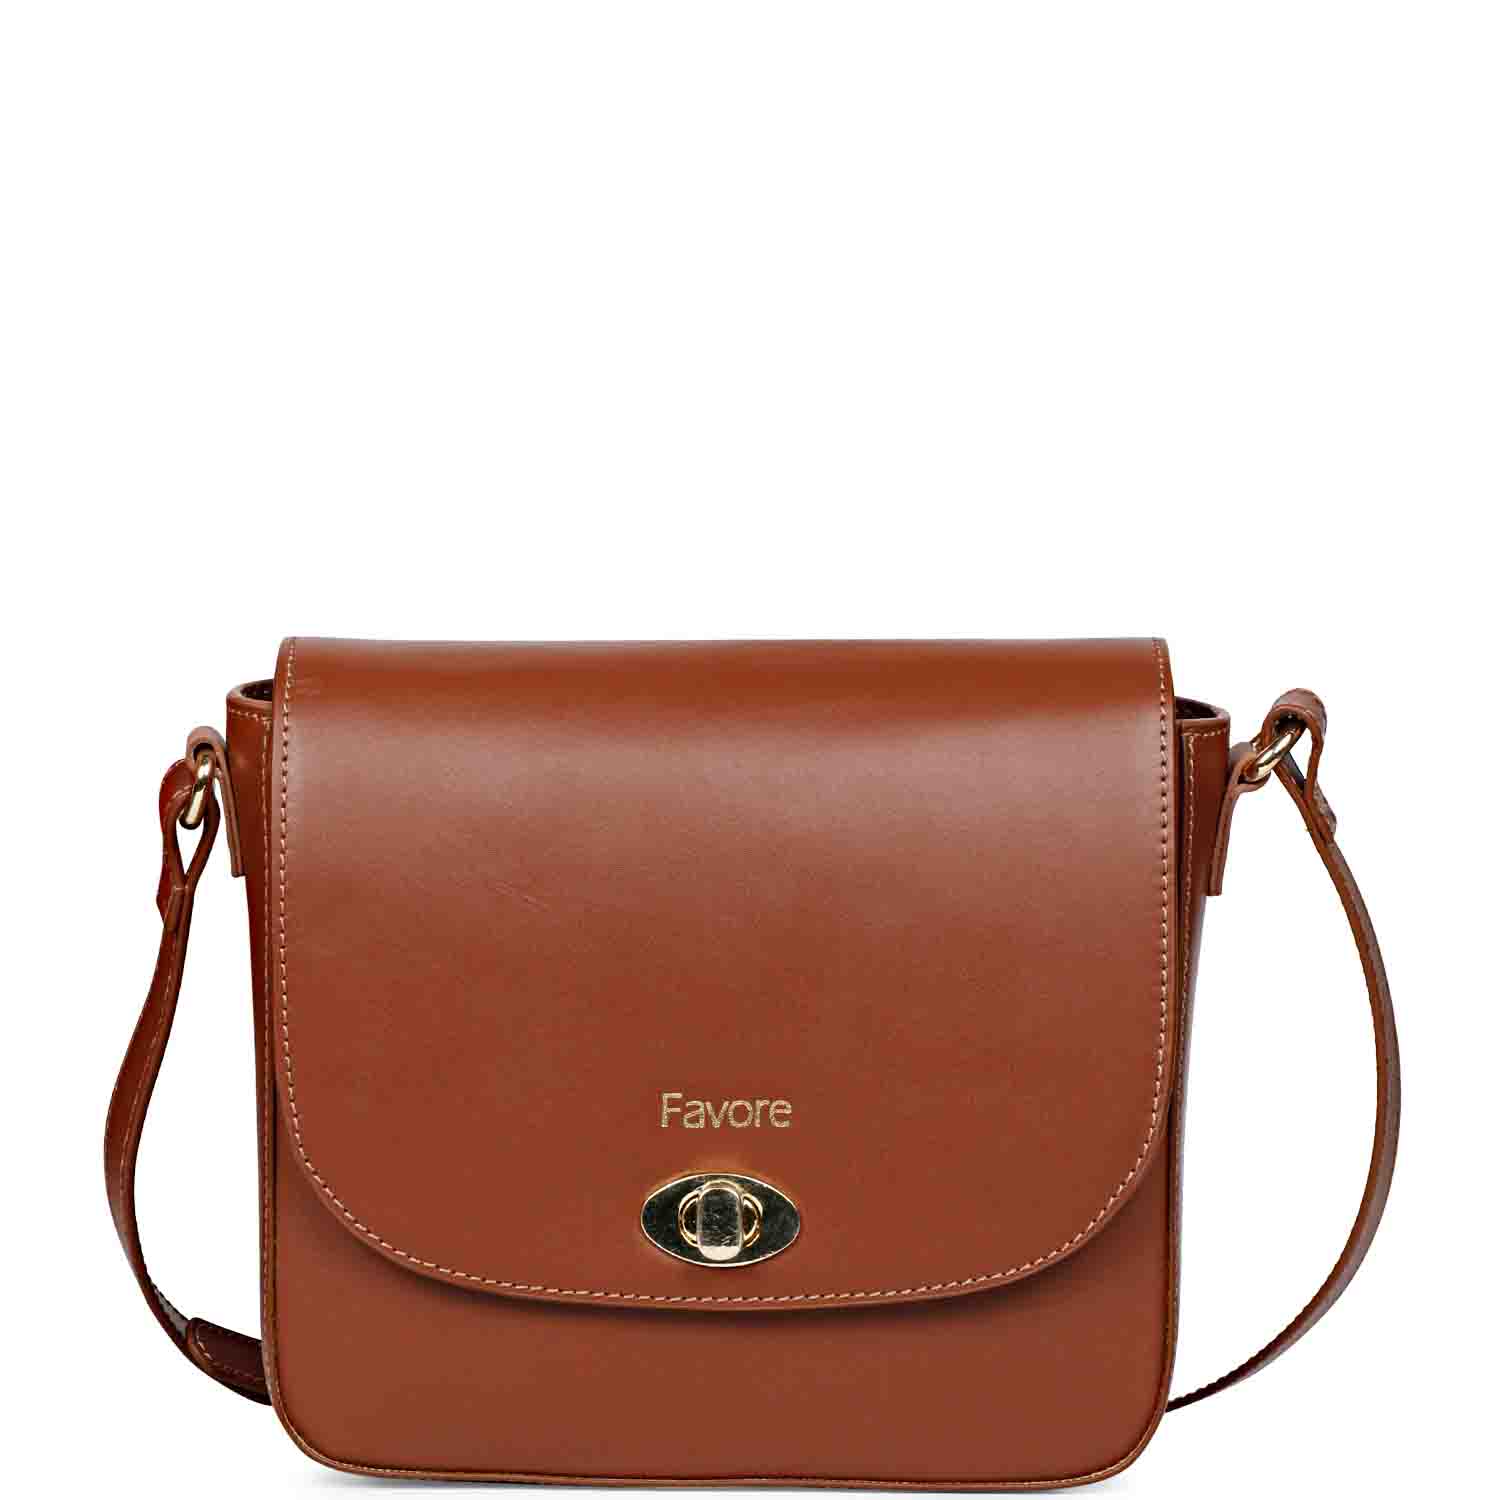 Buy Leather Purse for Women | Jekyll and Hide Australia